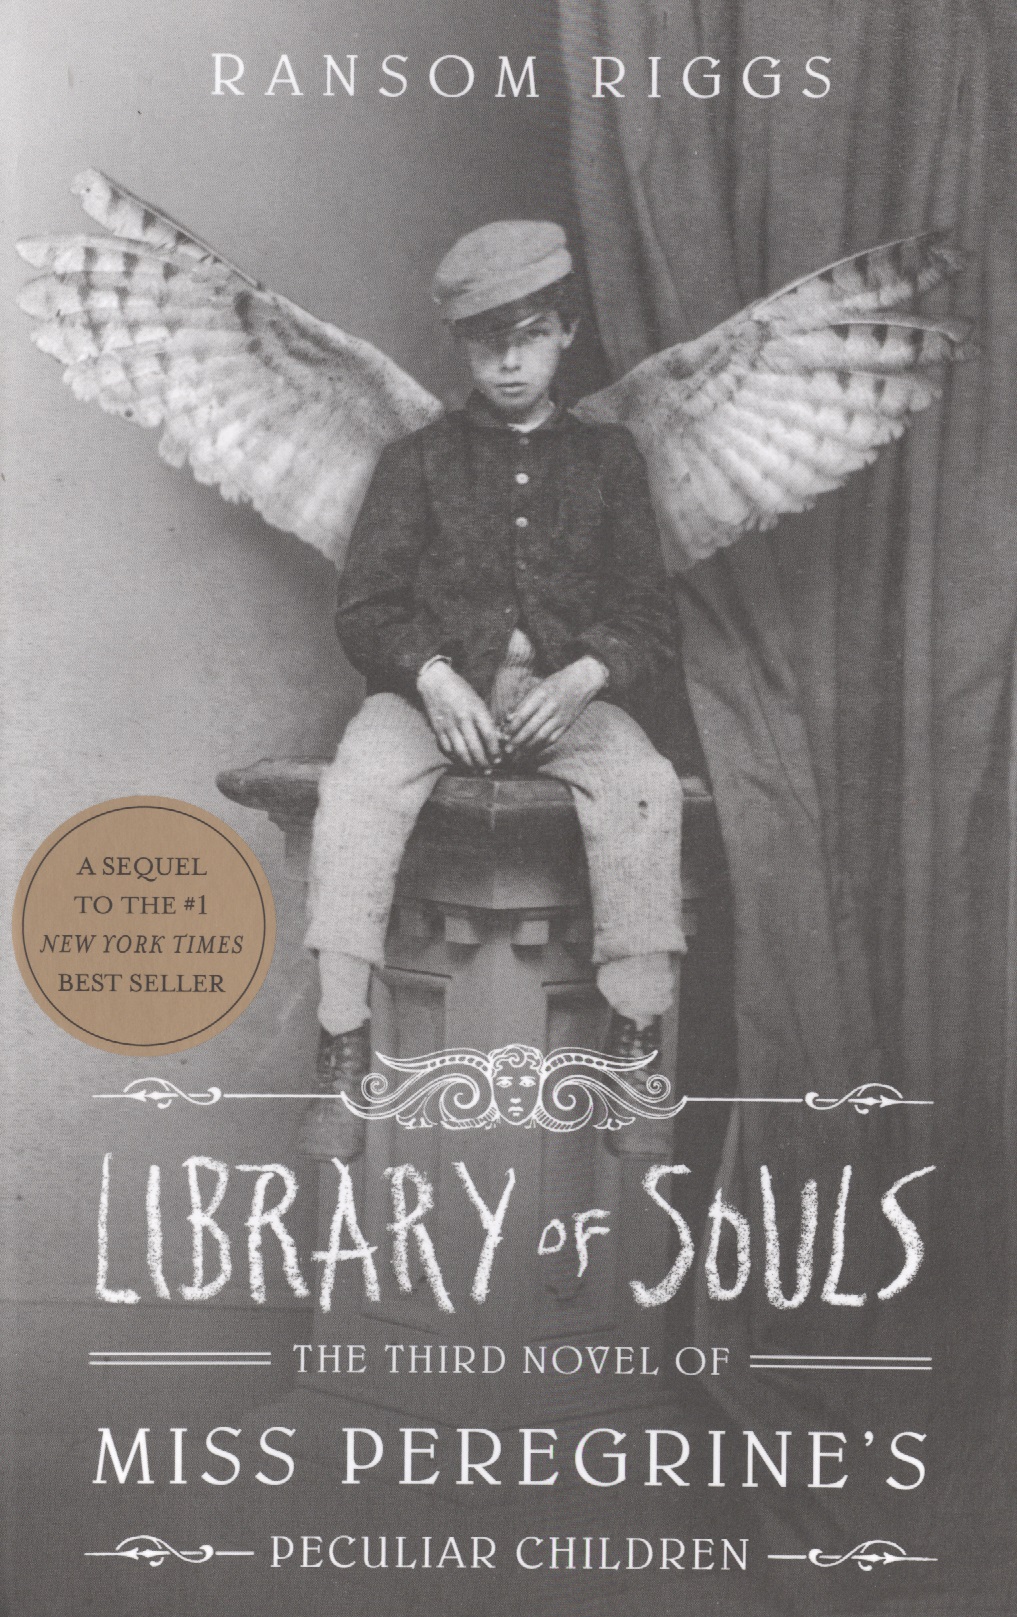 Riggs Ralph M. Library of Souls riggs ransom miss peregrine s home for peculiar children